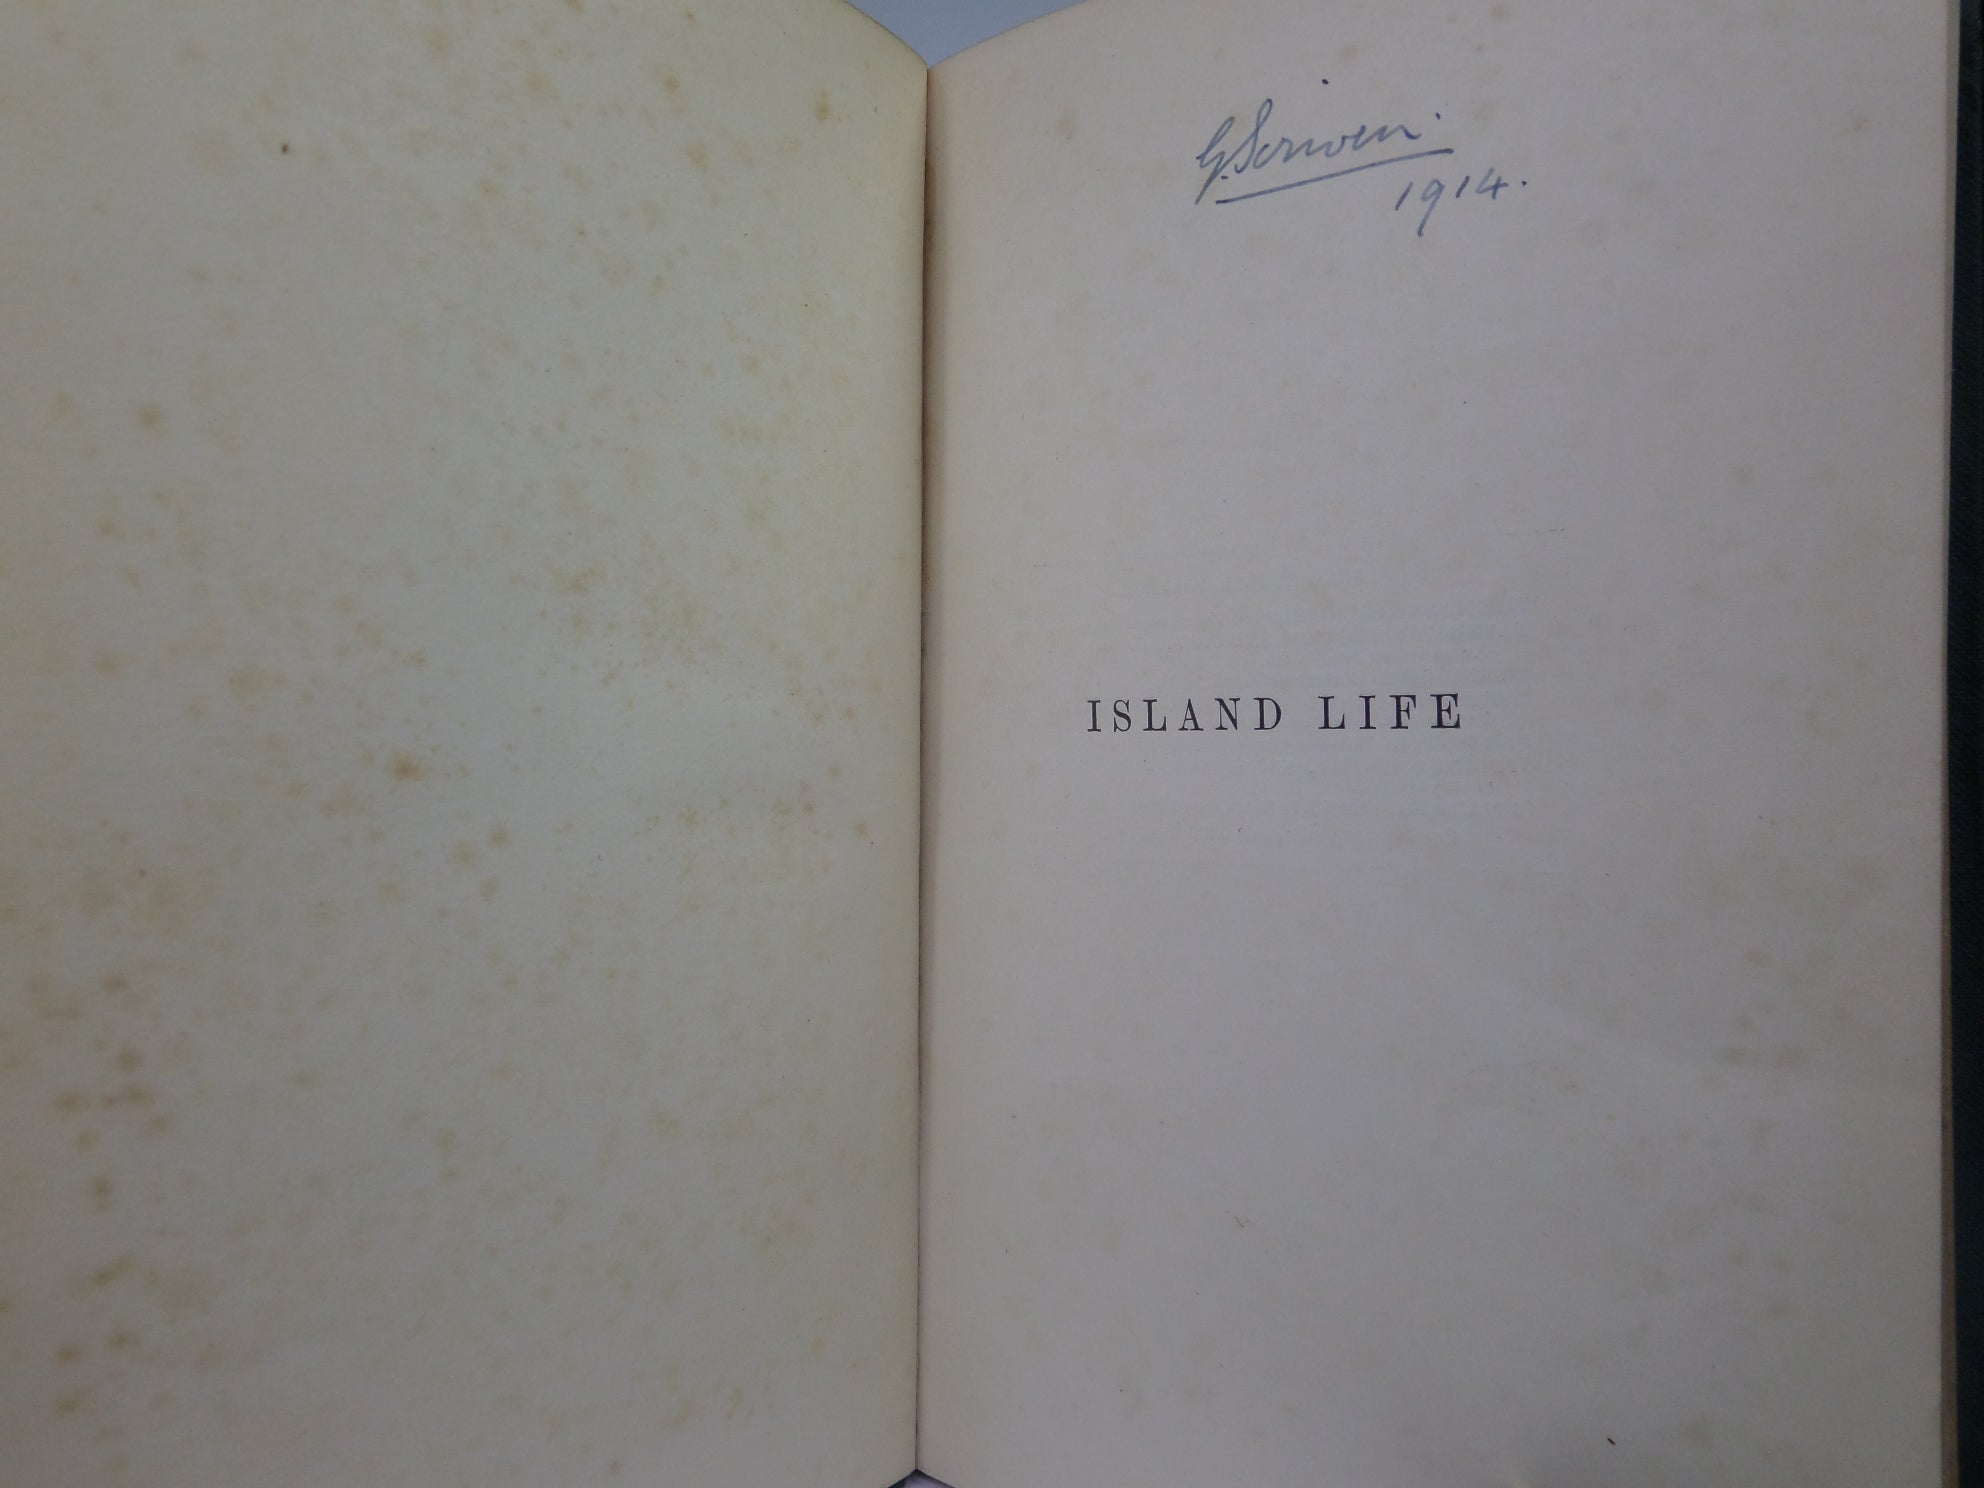 ISLAND LIFE BY ALFRED RUSSELL WALLACE 1911 THIRD EDITION